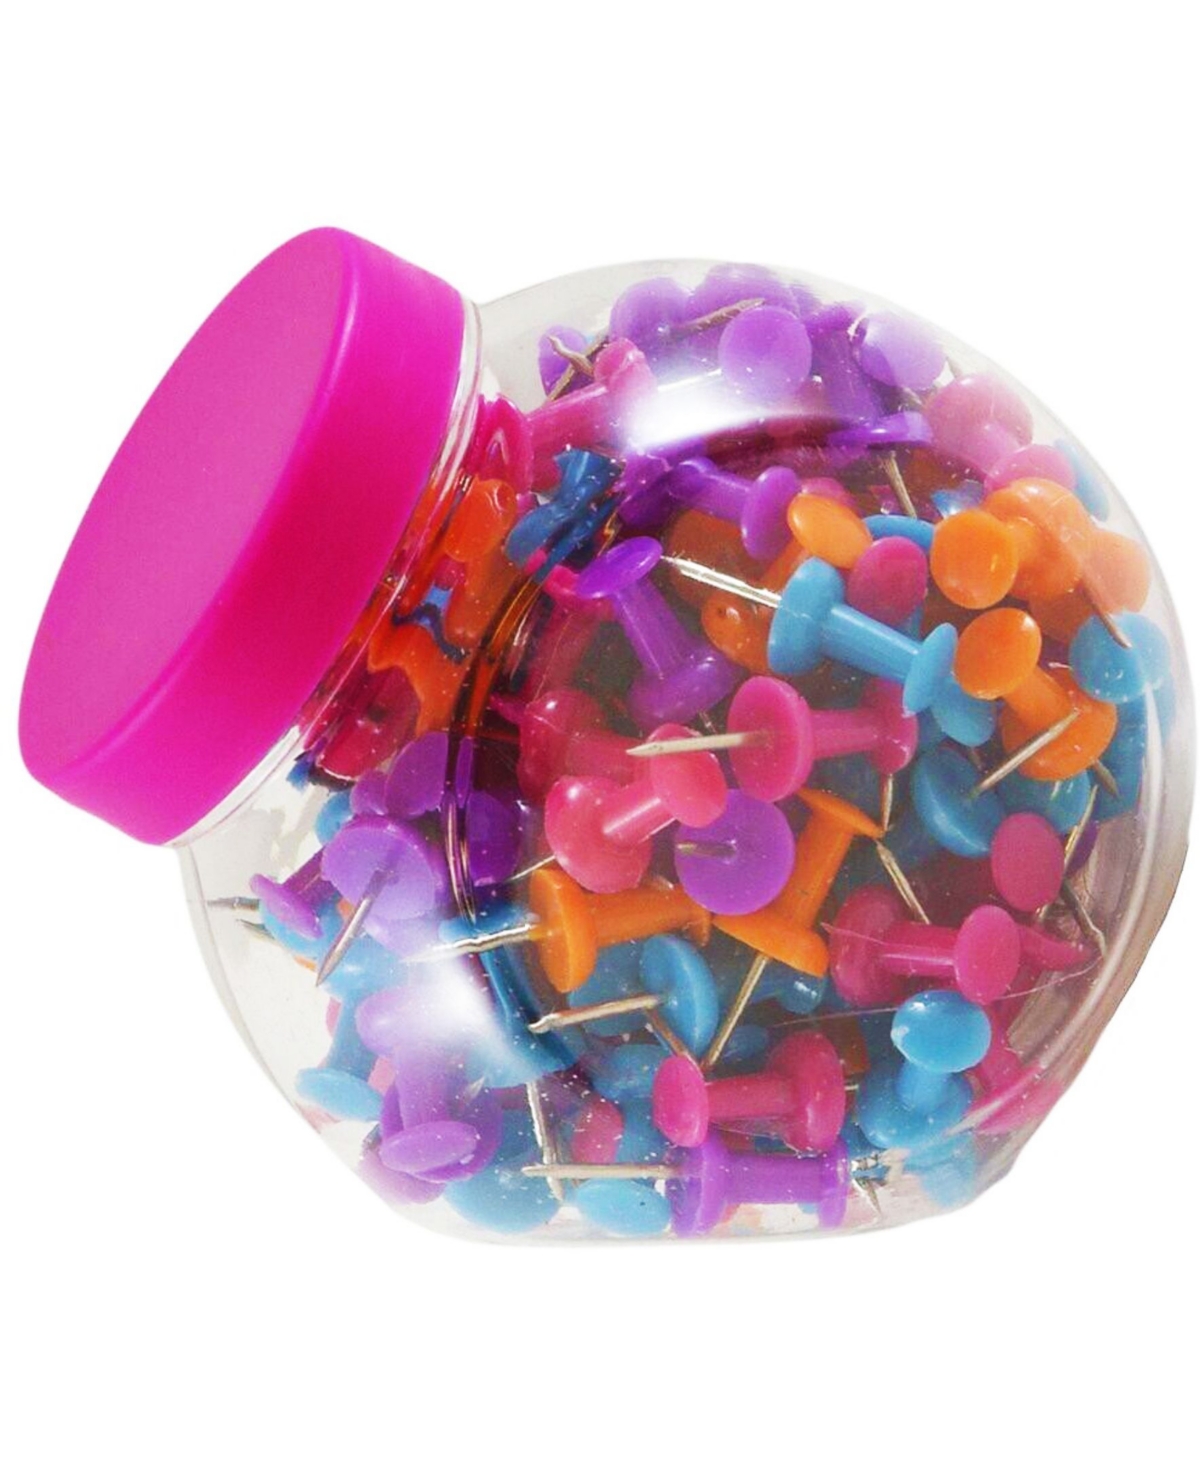 Colorful Push Pins - Assorted Color Pushpin Jar - 150 Per Pack - Assorted